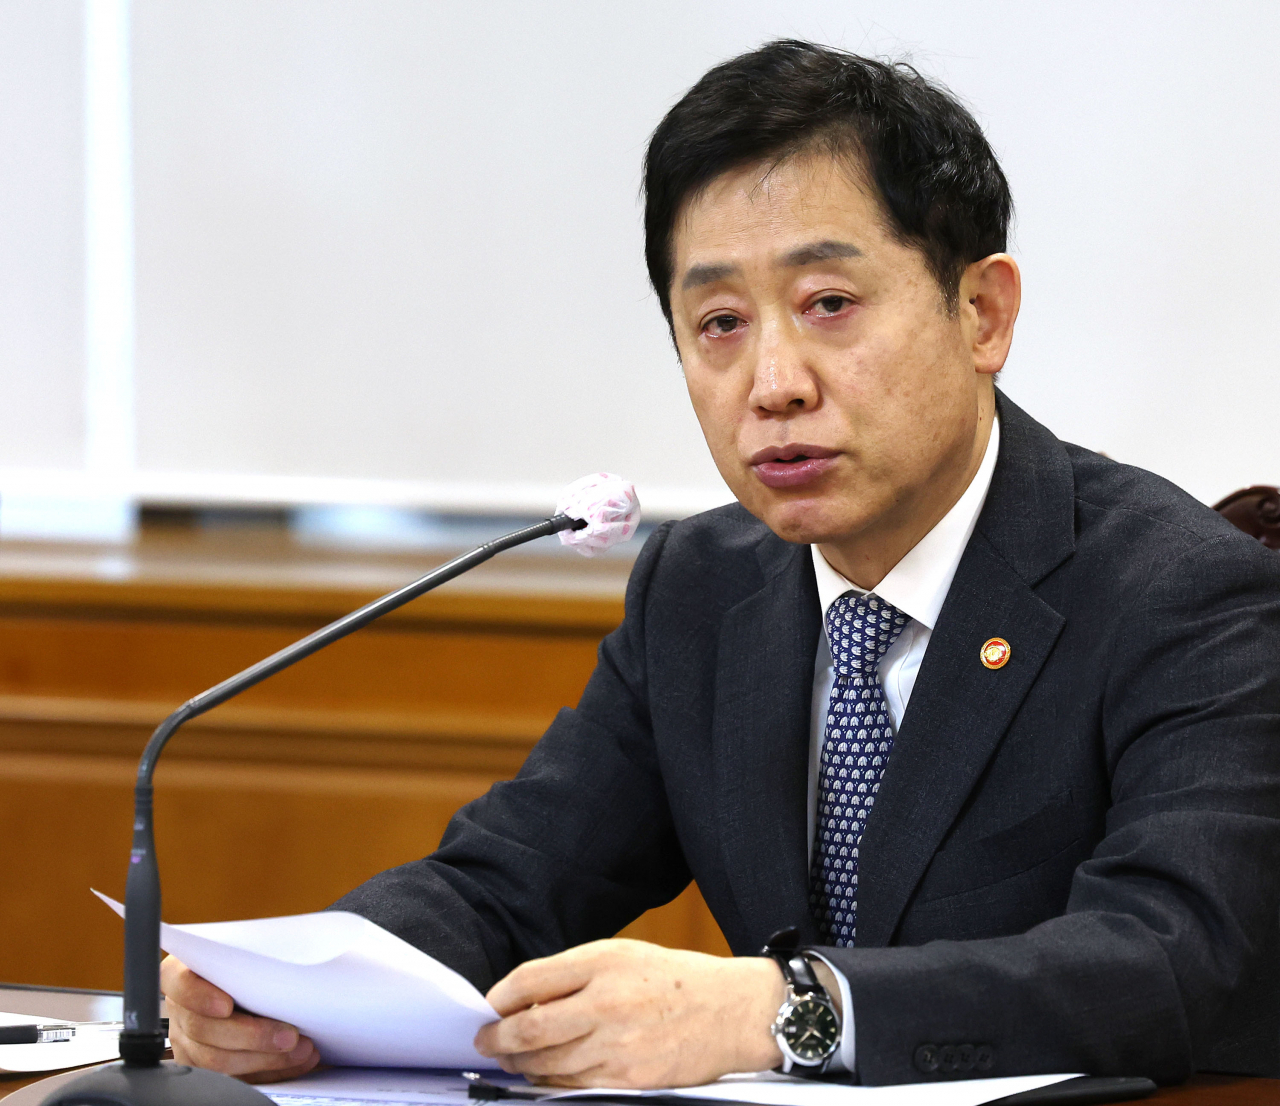 The file photo, taken Feb. 15, shows Kim Joo-hyun, chairman of the Financial Services Commission, speaking during a meeting with the heads of local banks in Seoul. (Yonhap)